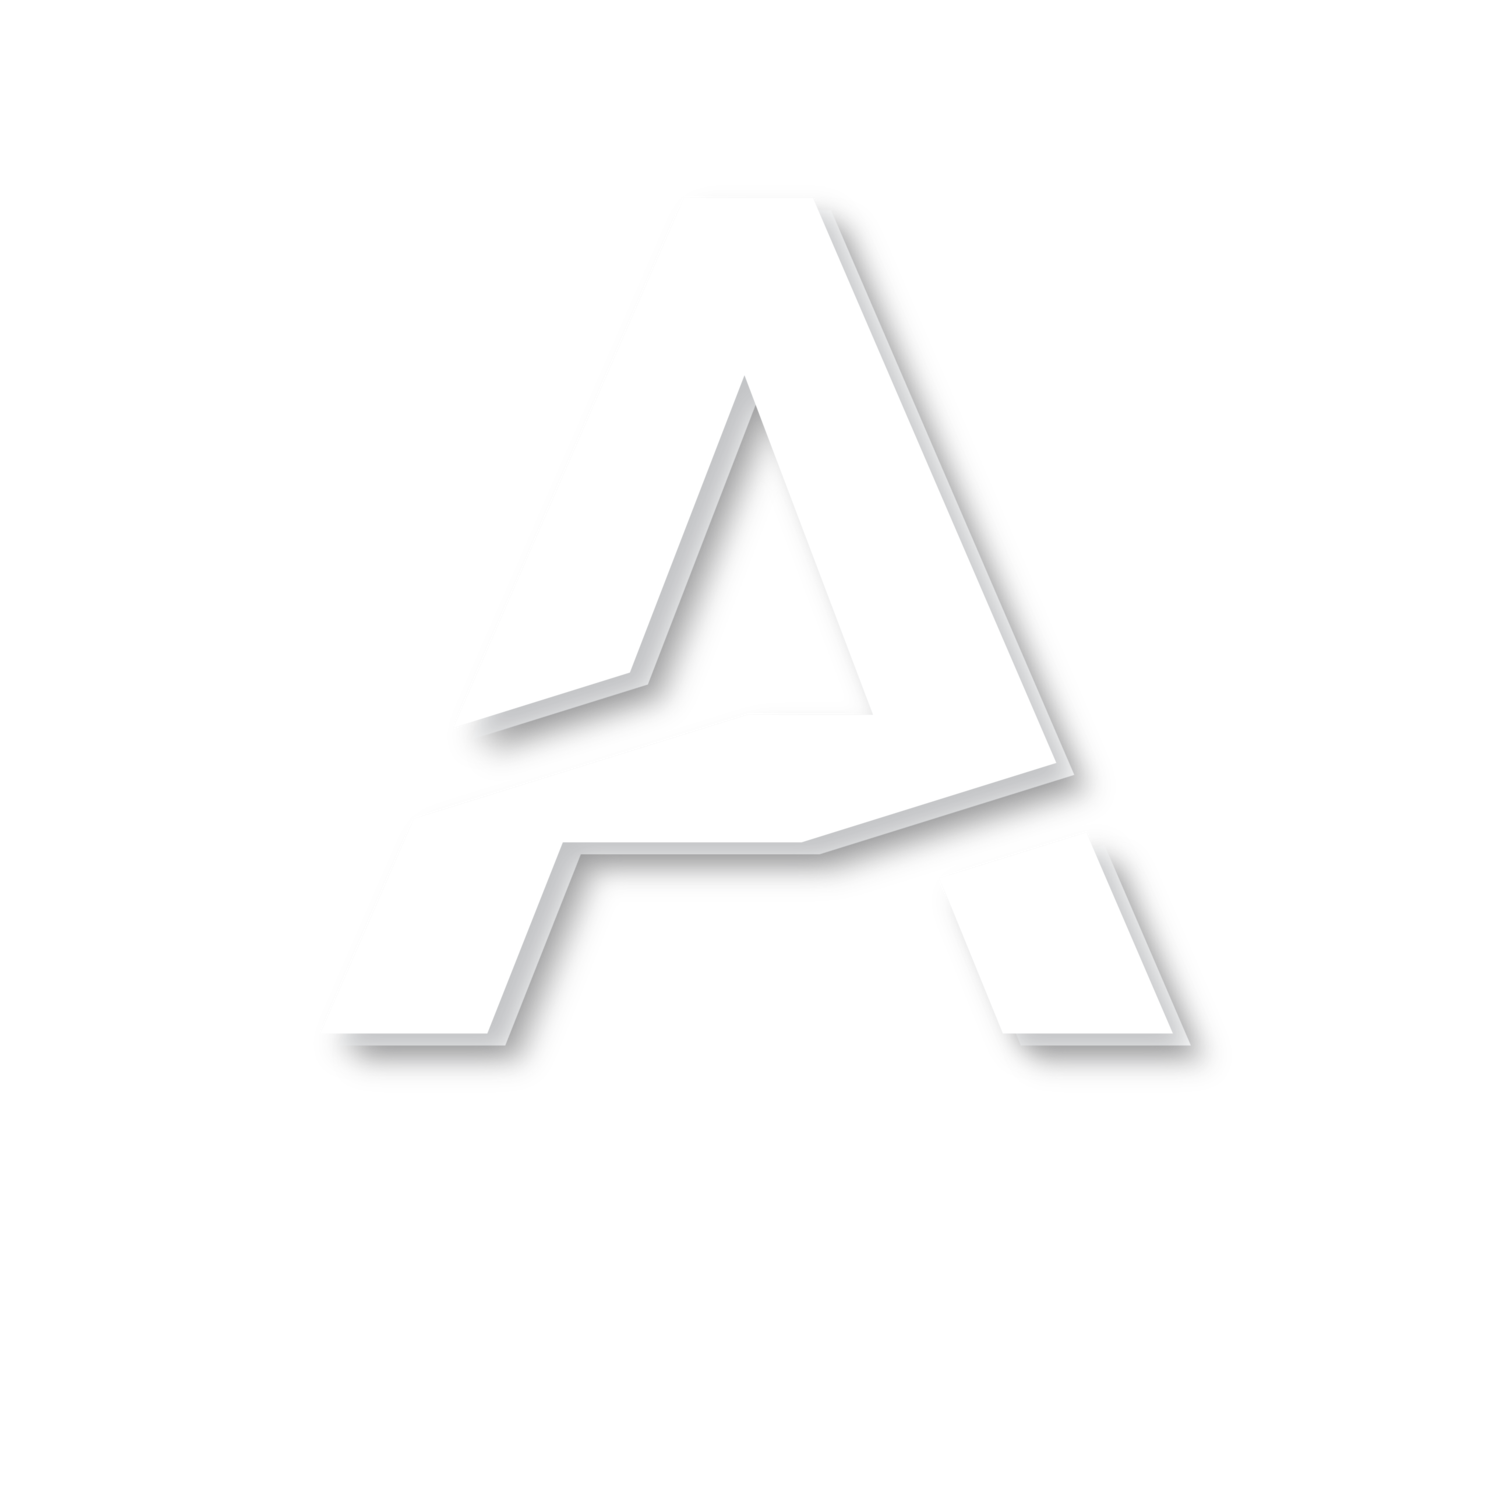 Accretive Realty Partners